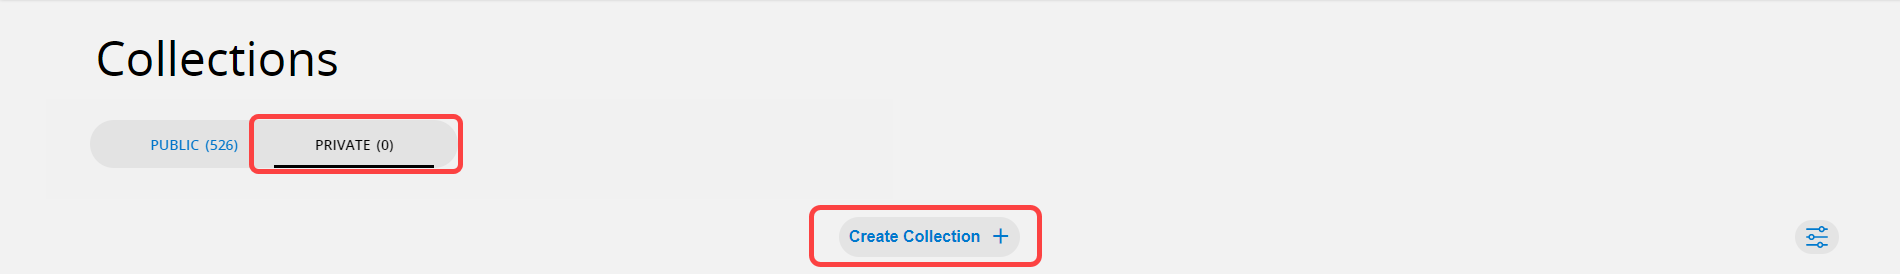 Collections page with Private tab and Create Collection option highlighted.